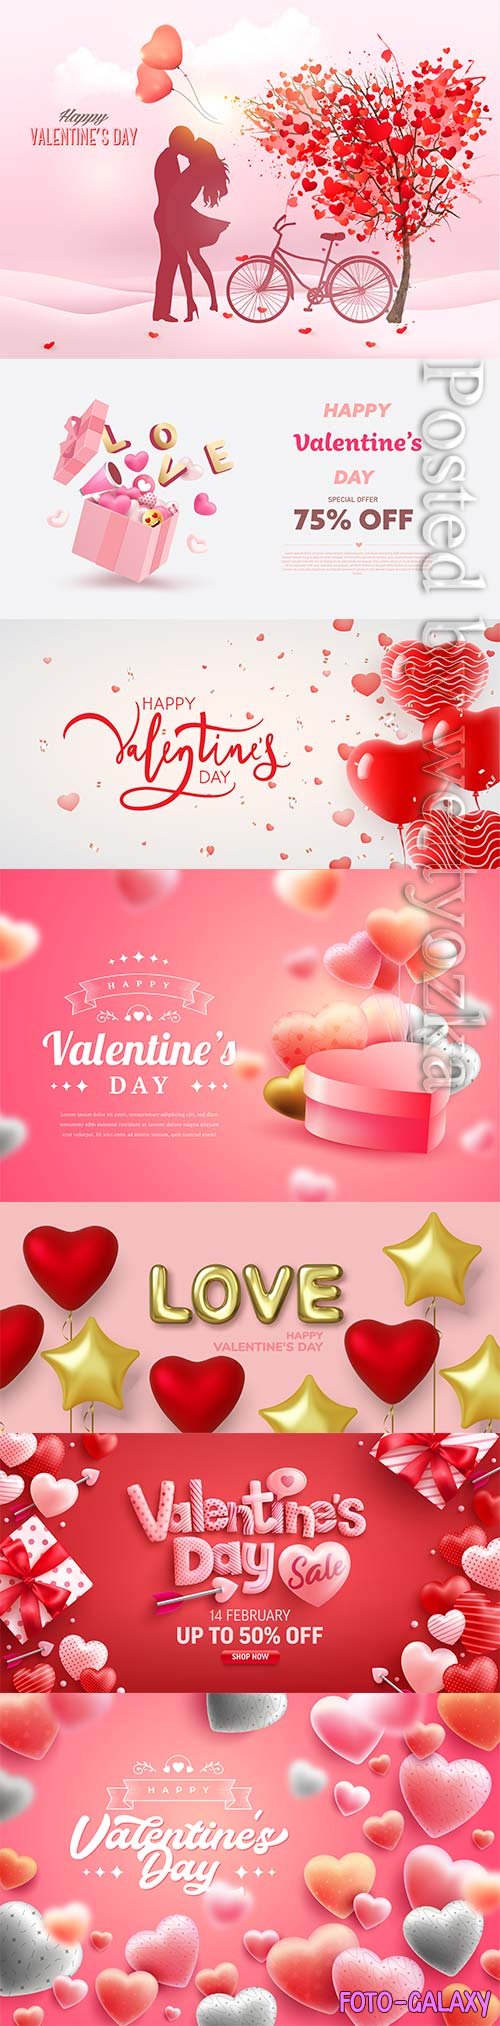 Happy valentines day in realistic 3d style